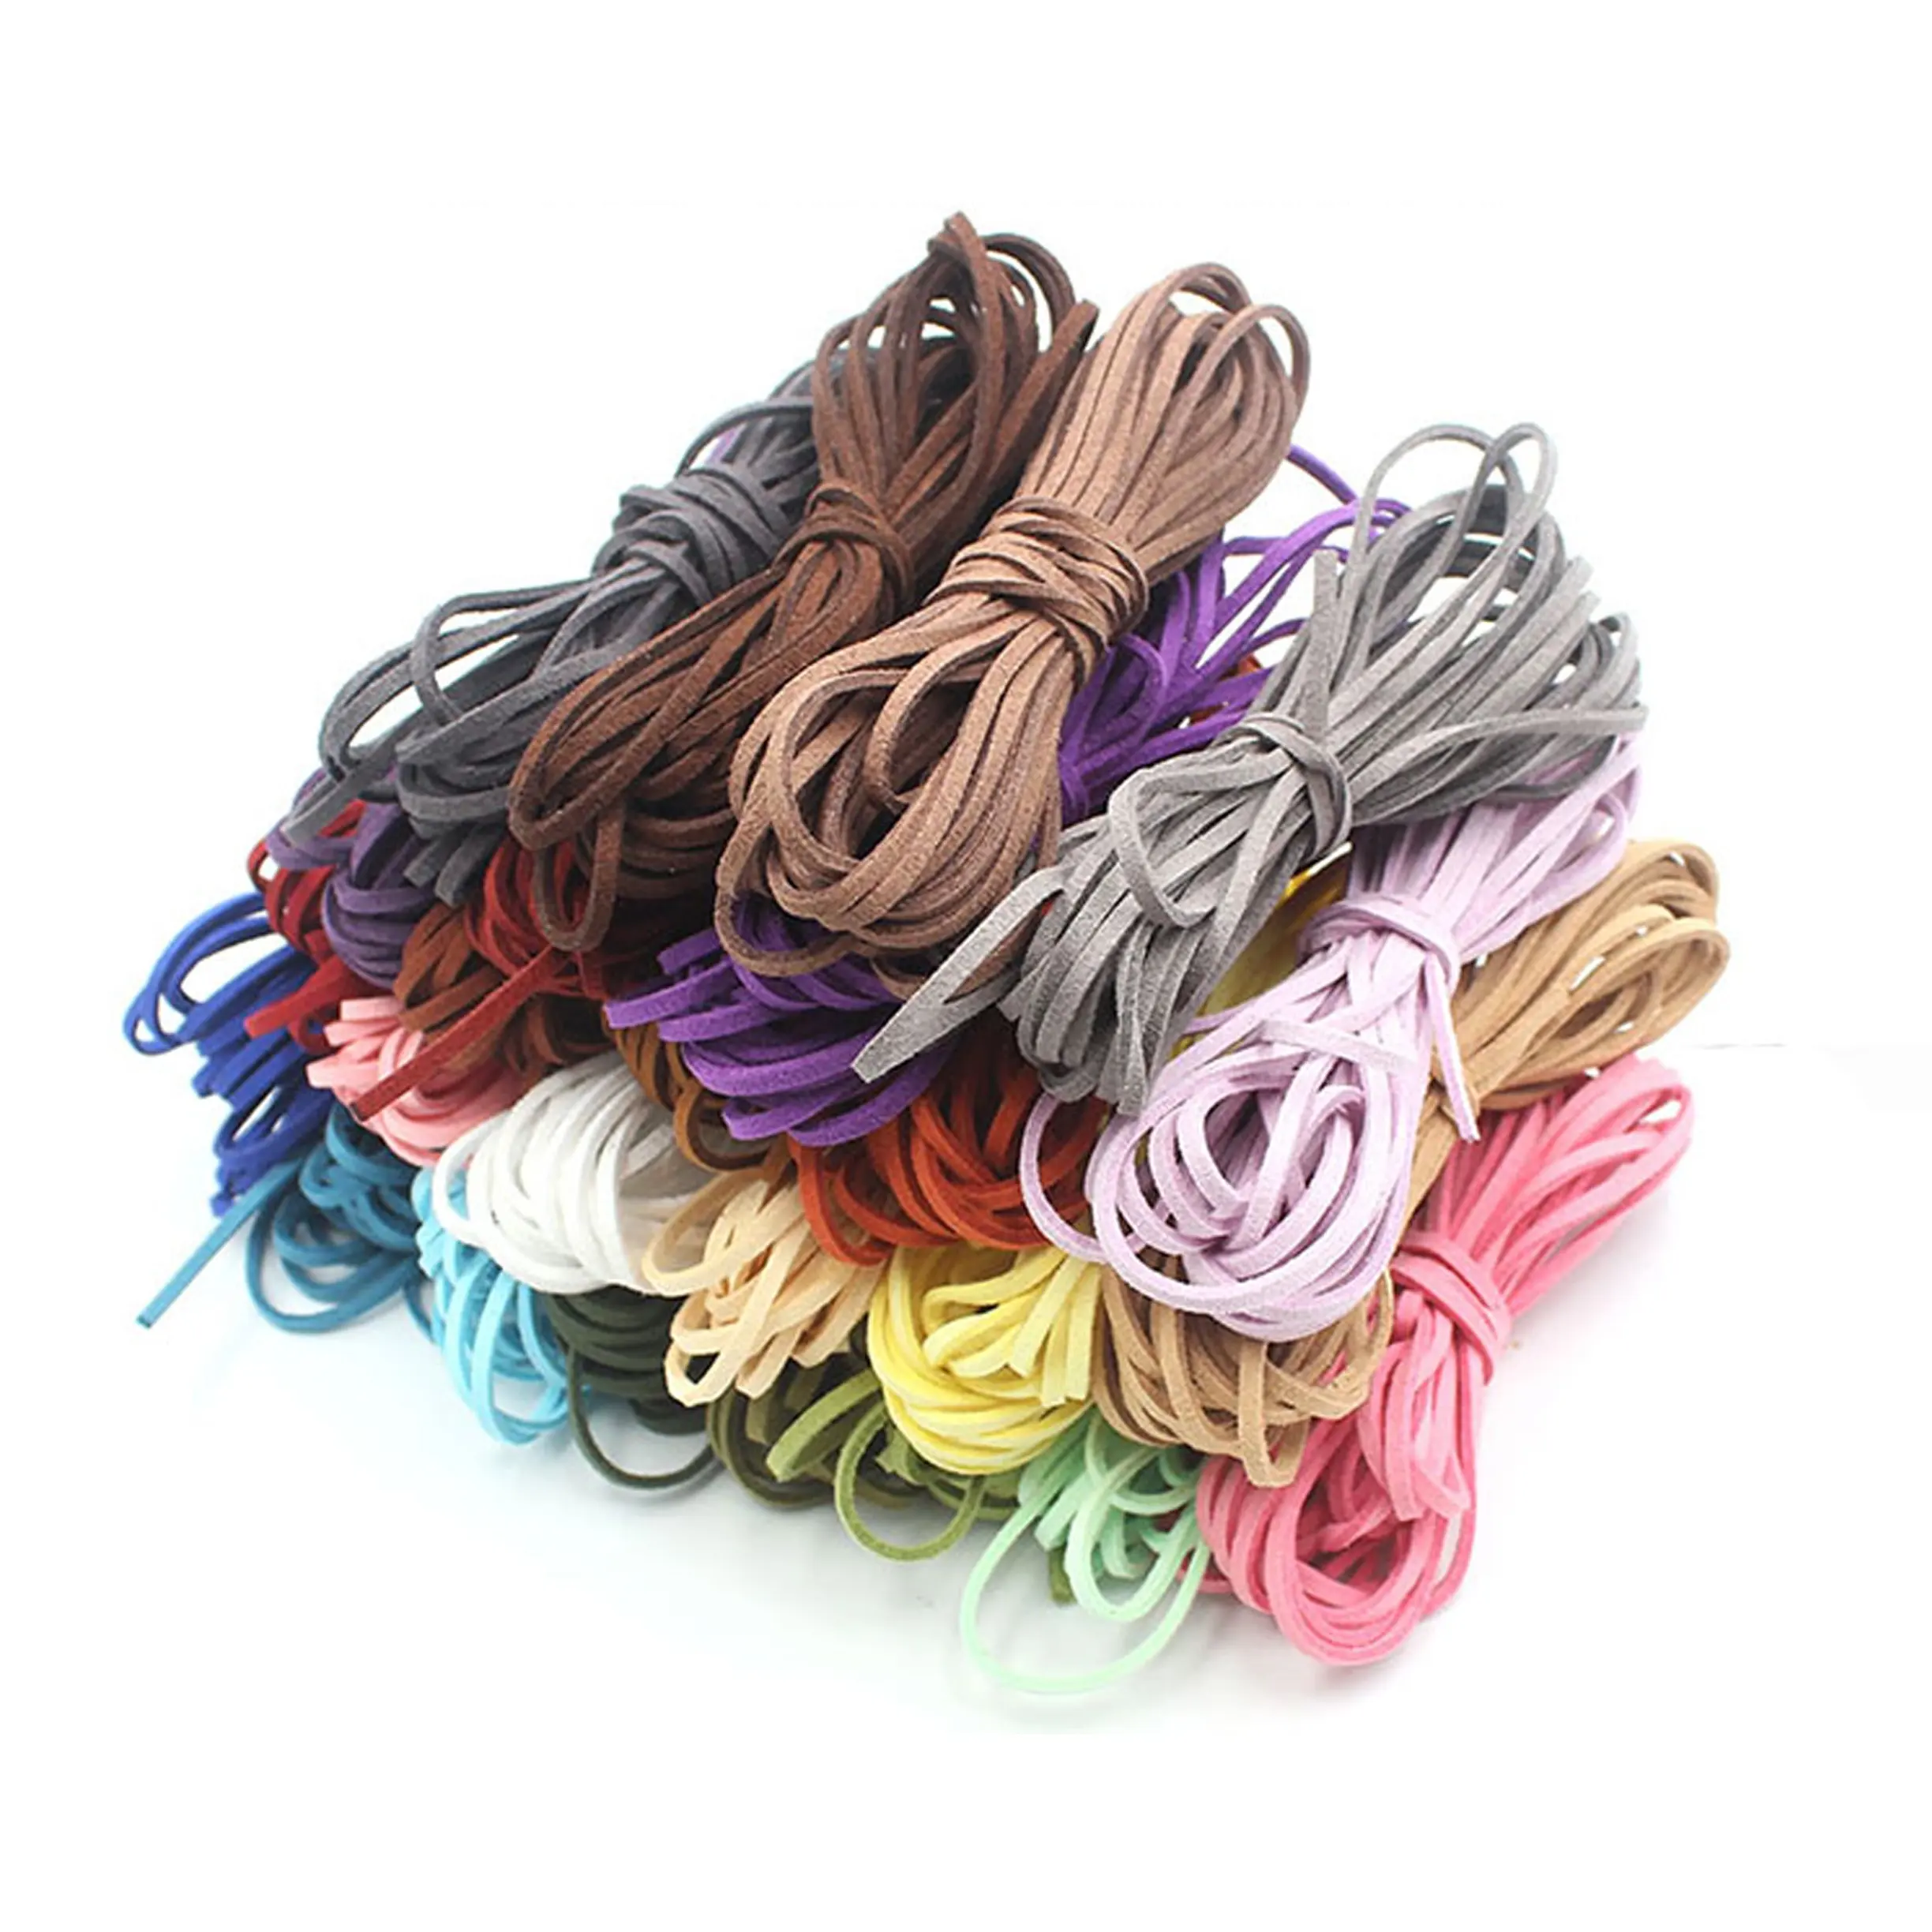 Jewelry Making Flat Micro Fiber Lace Faux Suede Leather Cord String Thread Velvet Cord for Necklace Bracelet Beading DIY Crafts